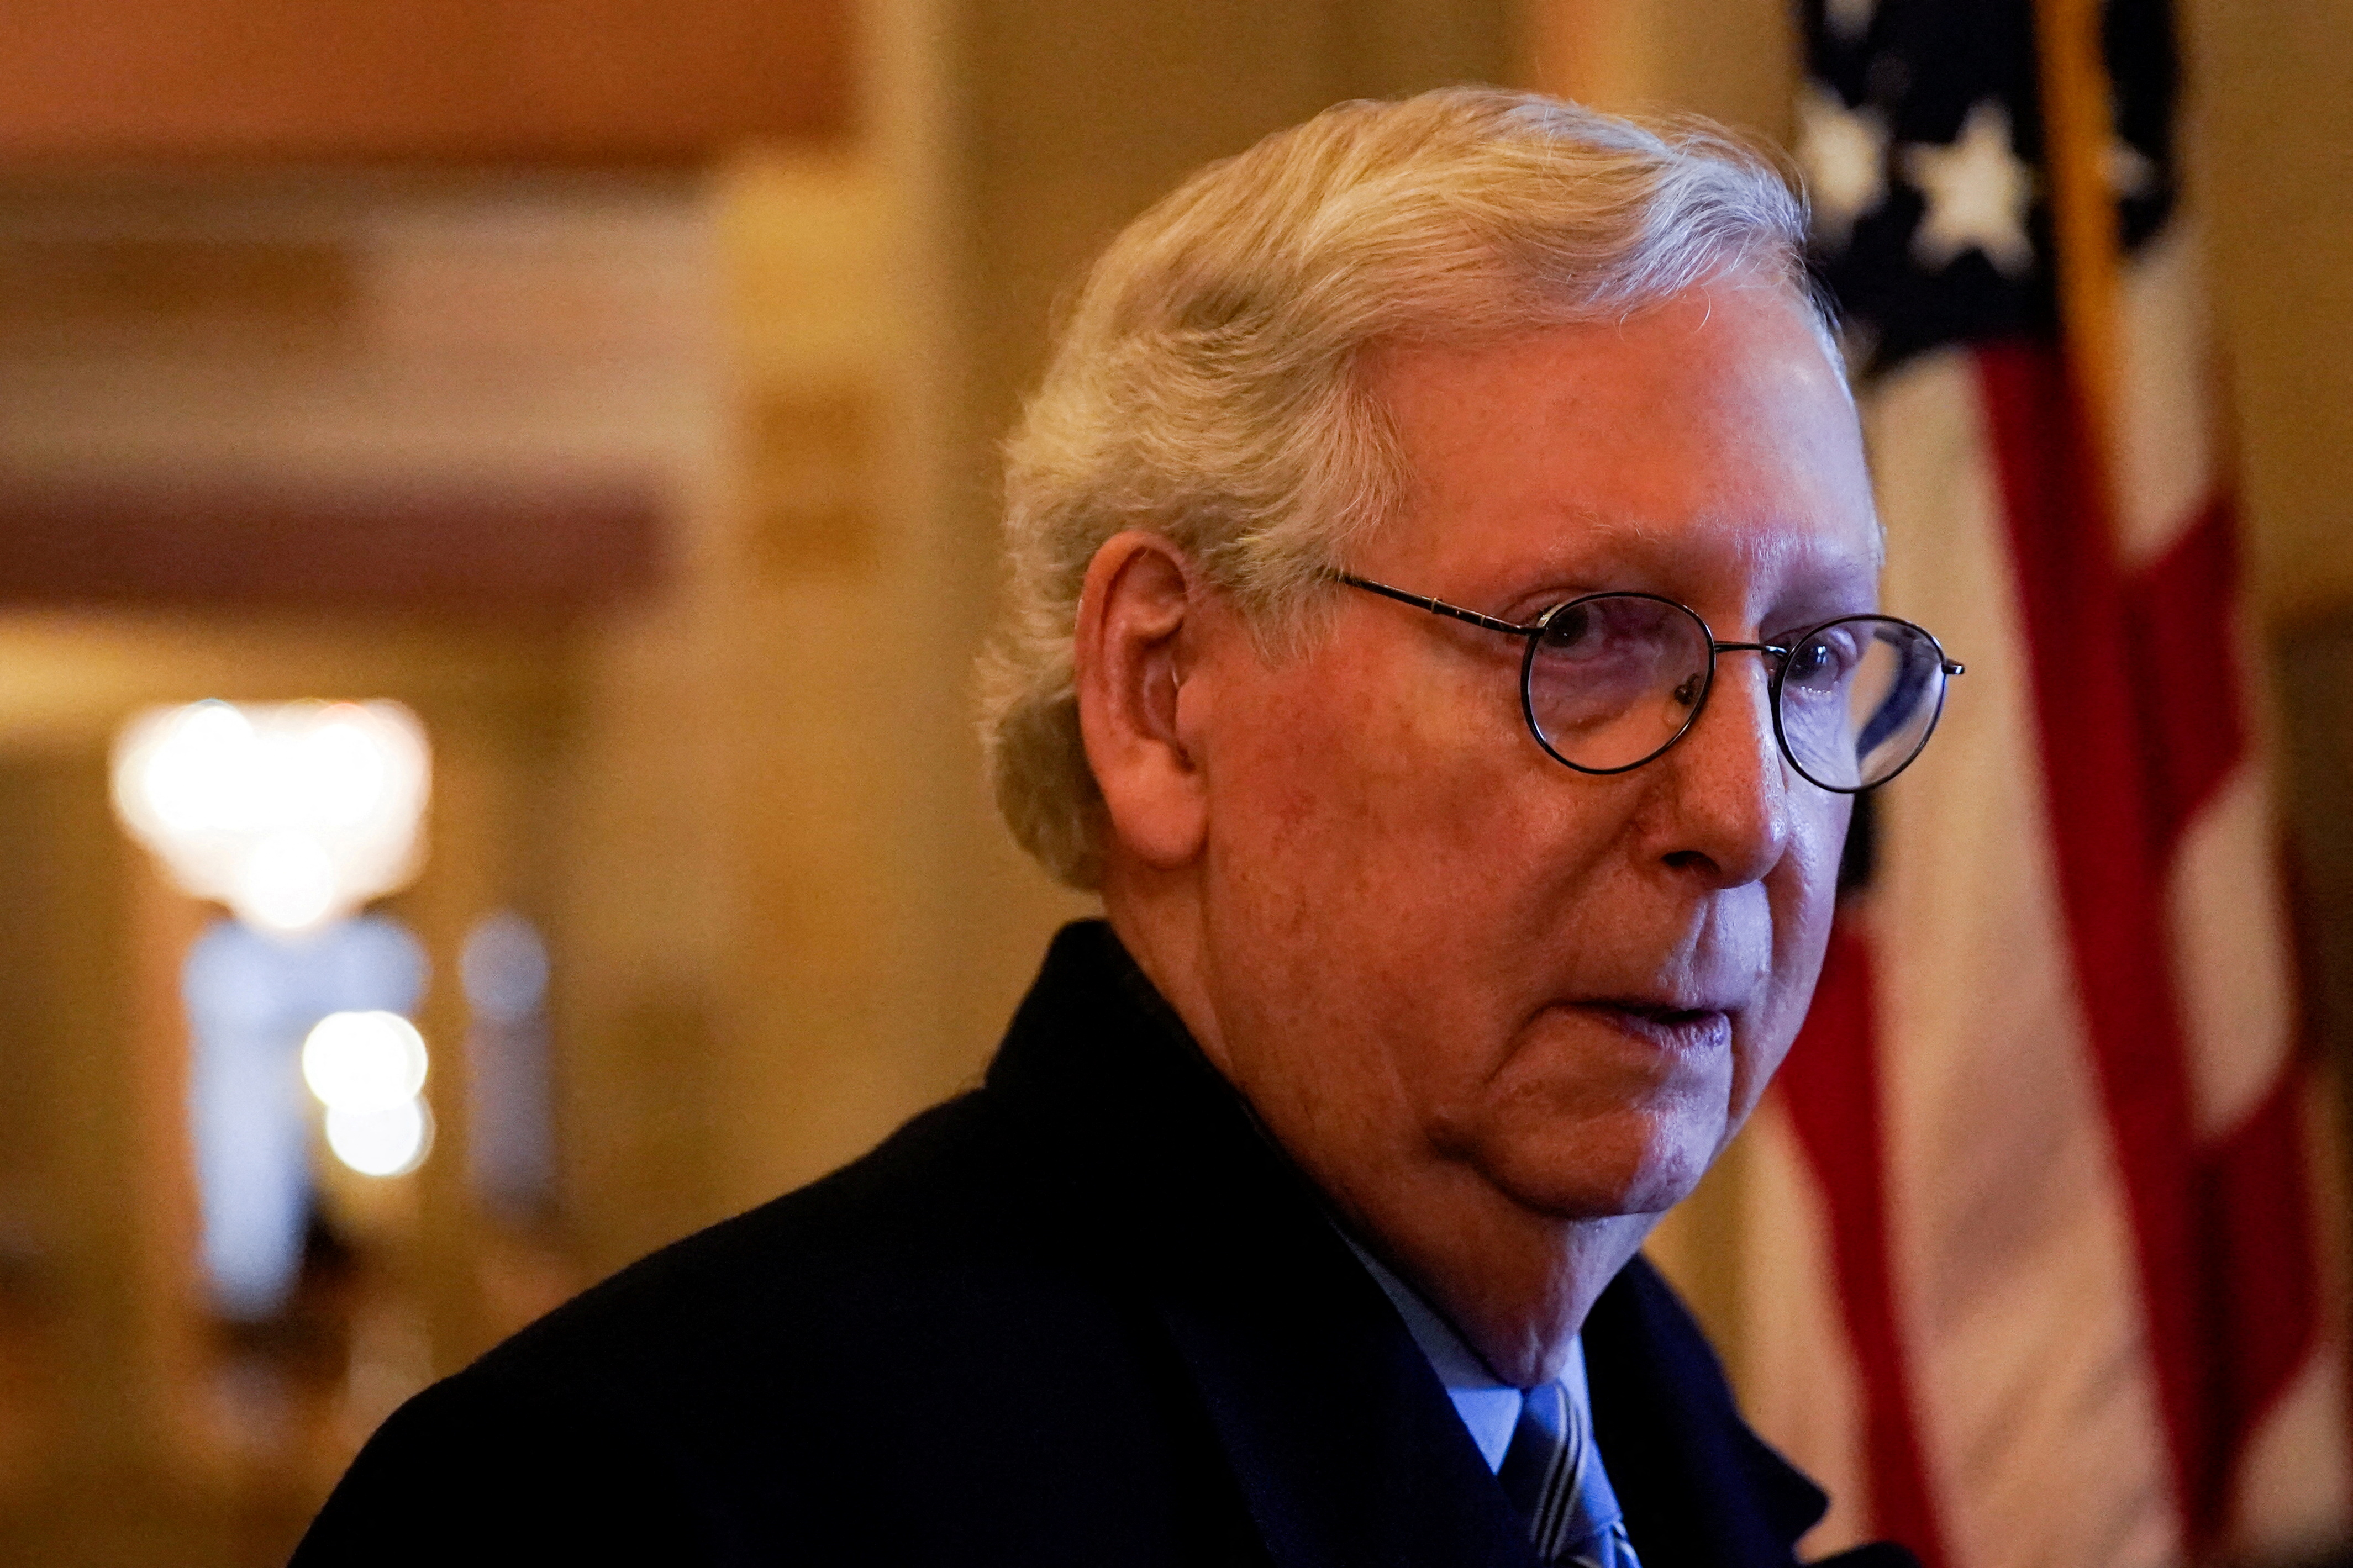 U.S. Senate Minority Leader Mitch McConnell (R-KY) arrives at the U.S. Capitol in Washington